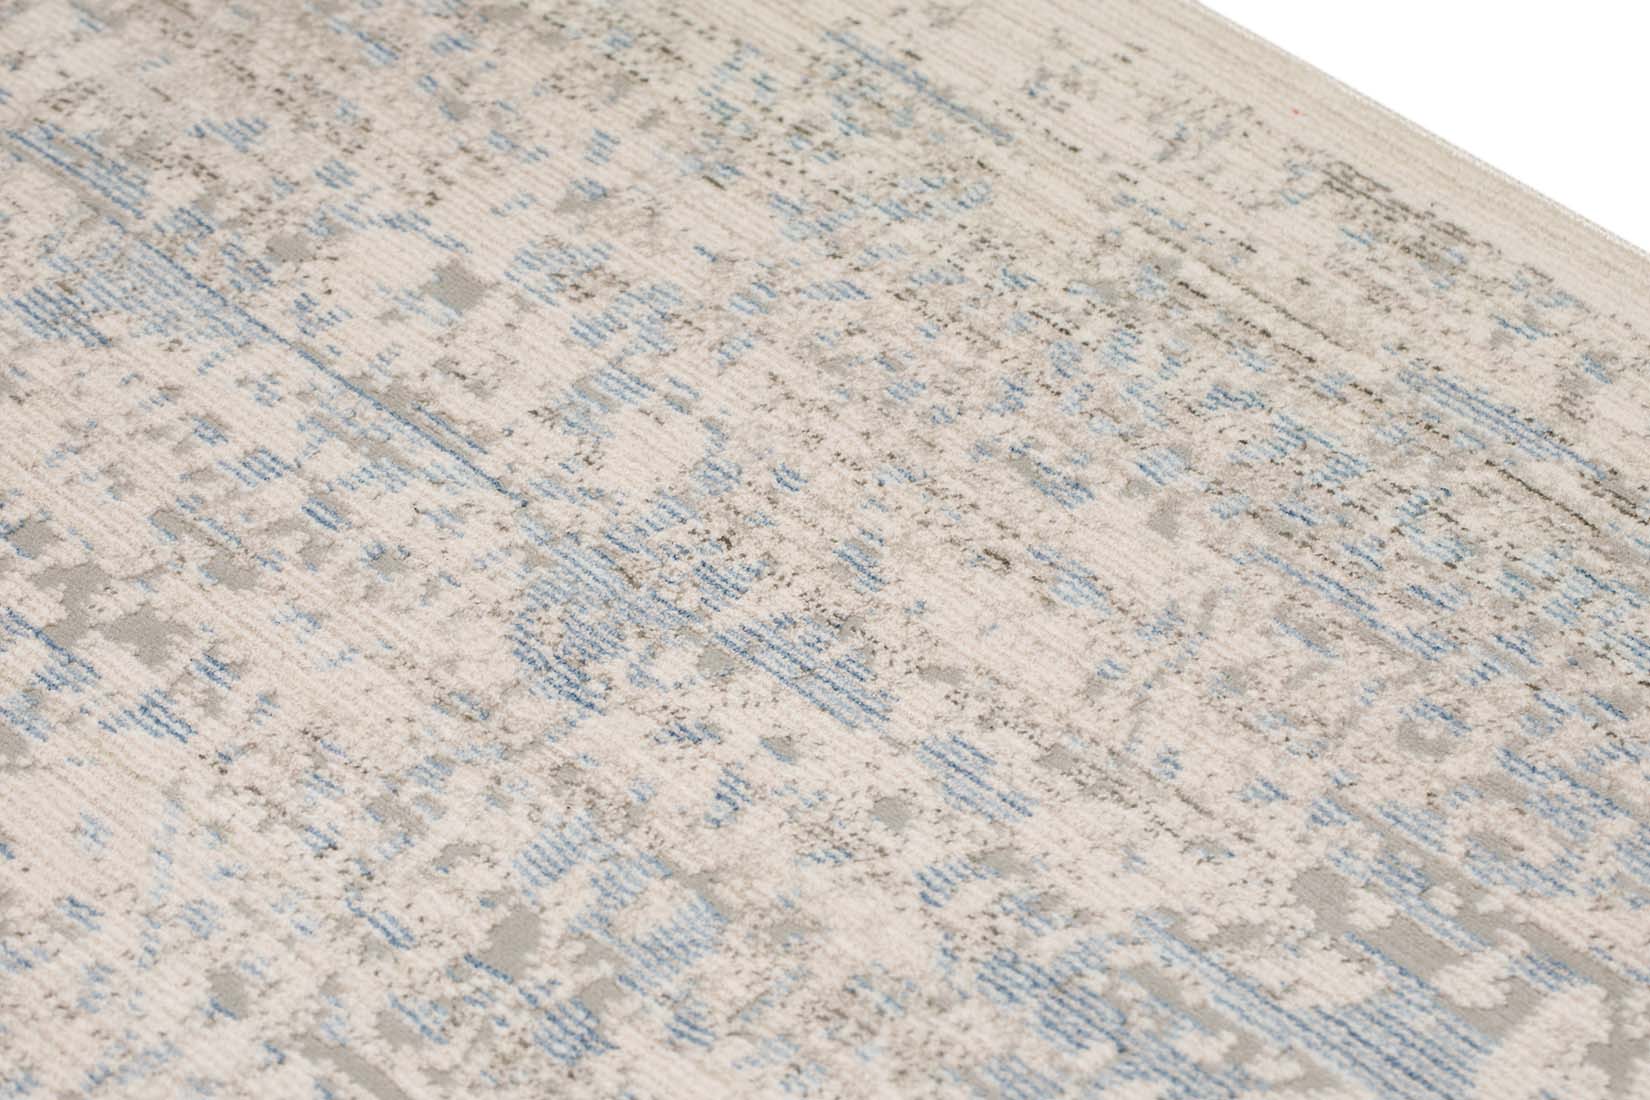 Persian style area rug in blue and grey
